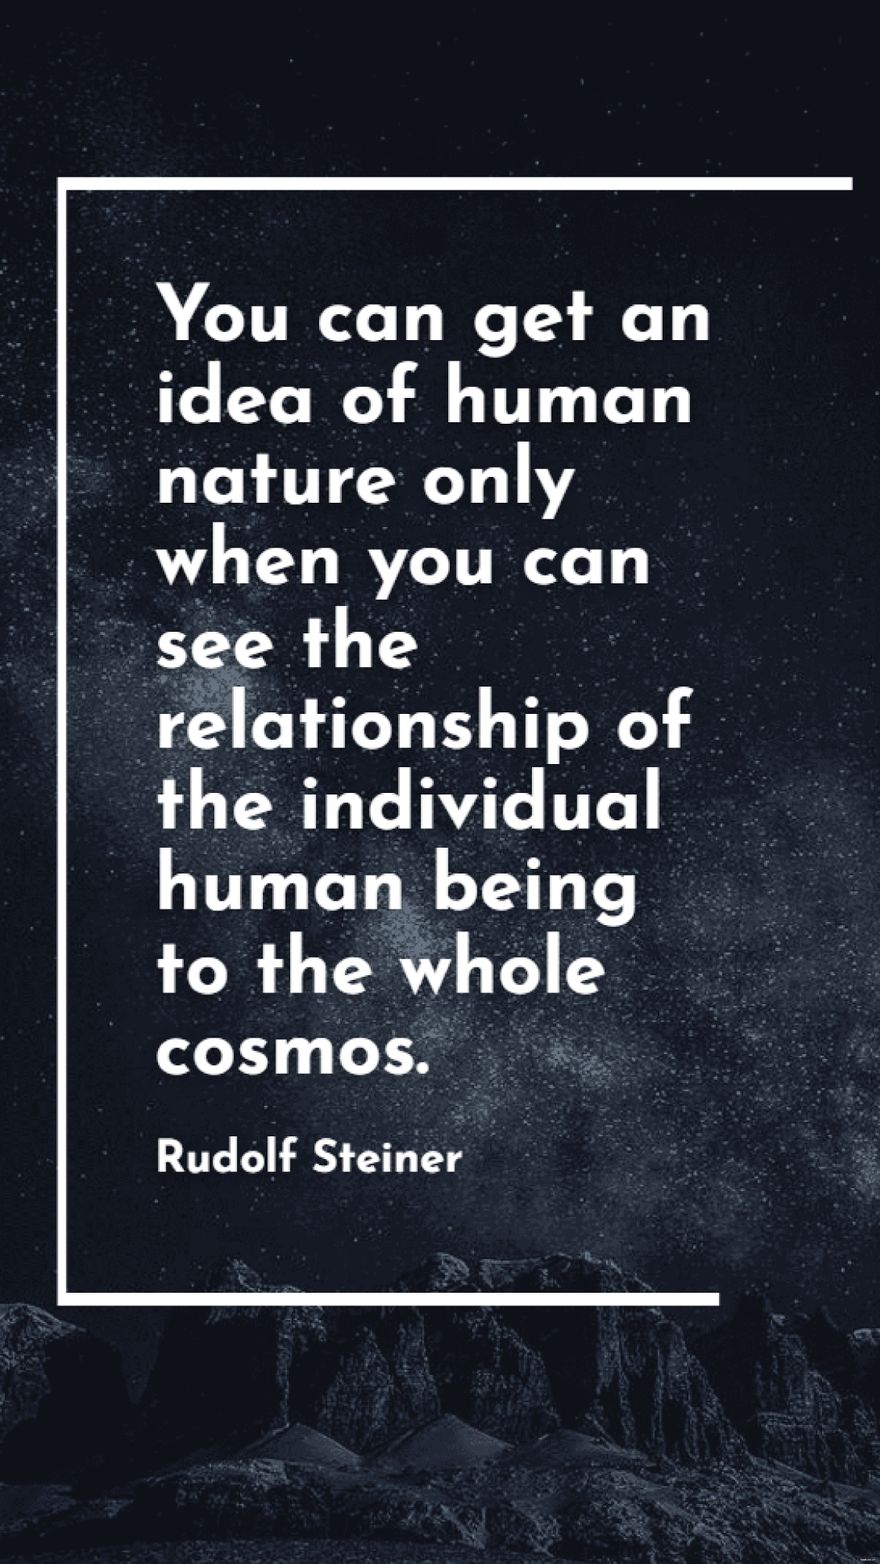 Rudolf Steiner - You can get an idea of human nature only when you can see the relationship of the individual human being to the whole cosmos.